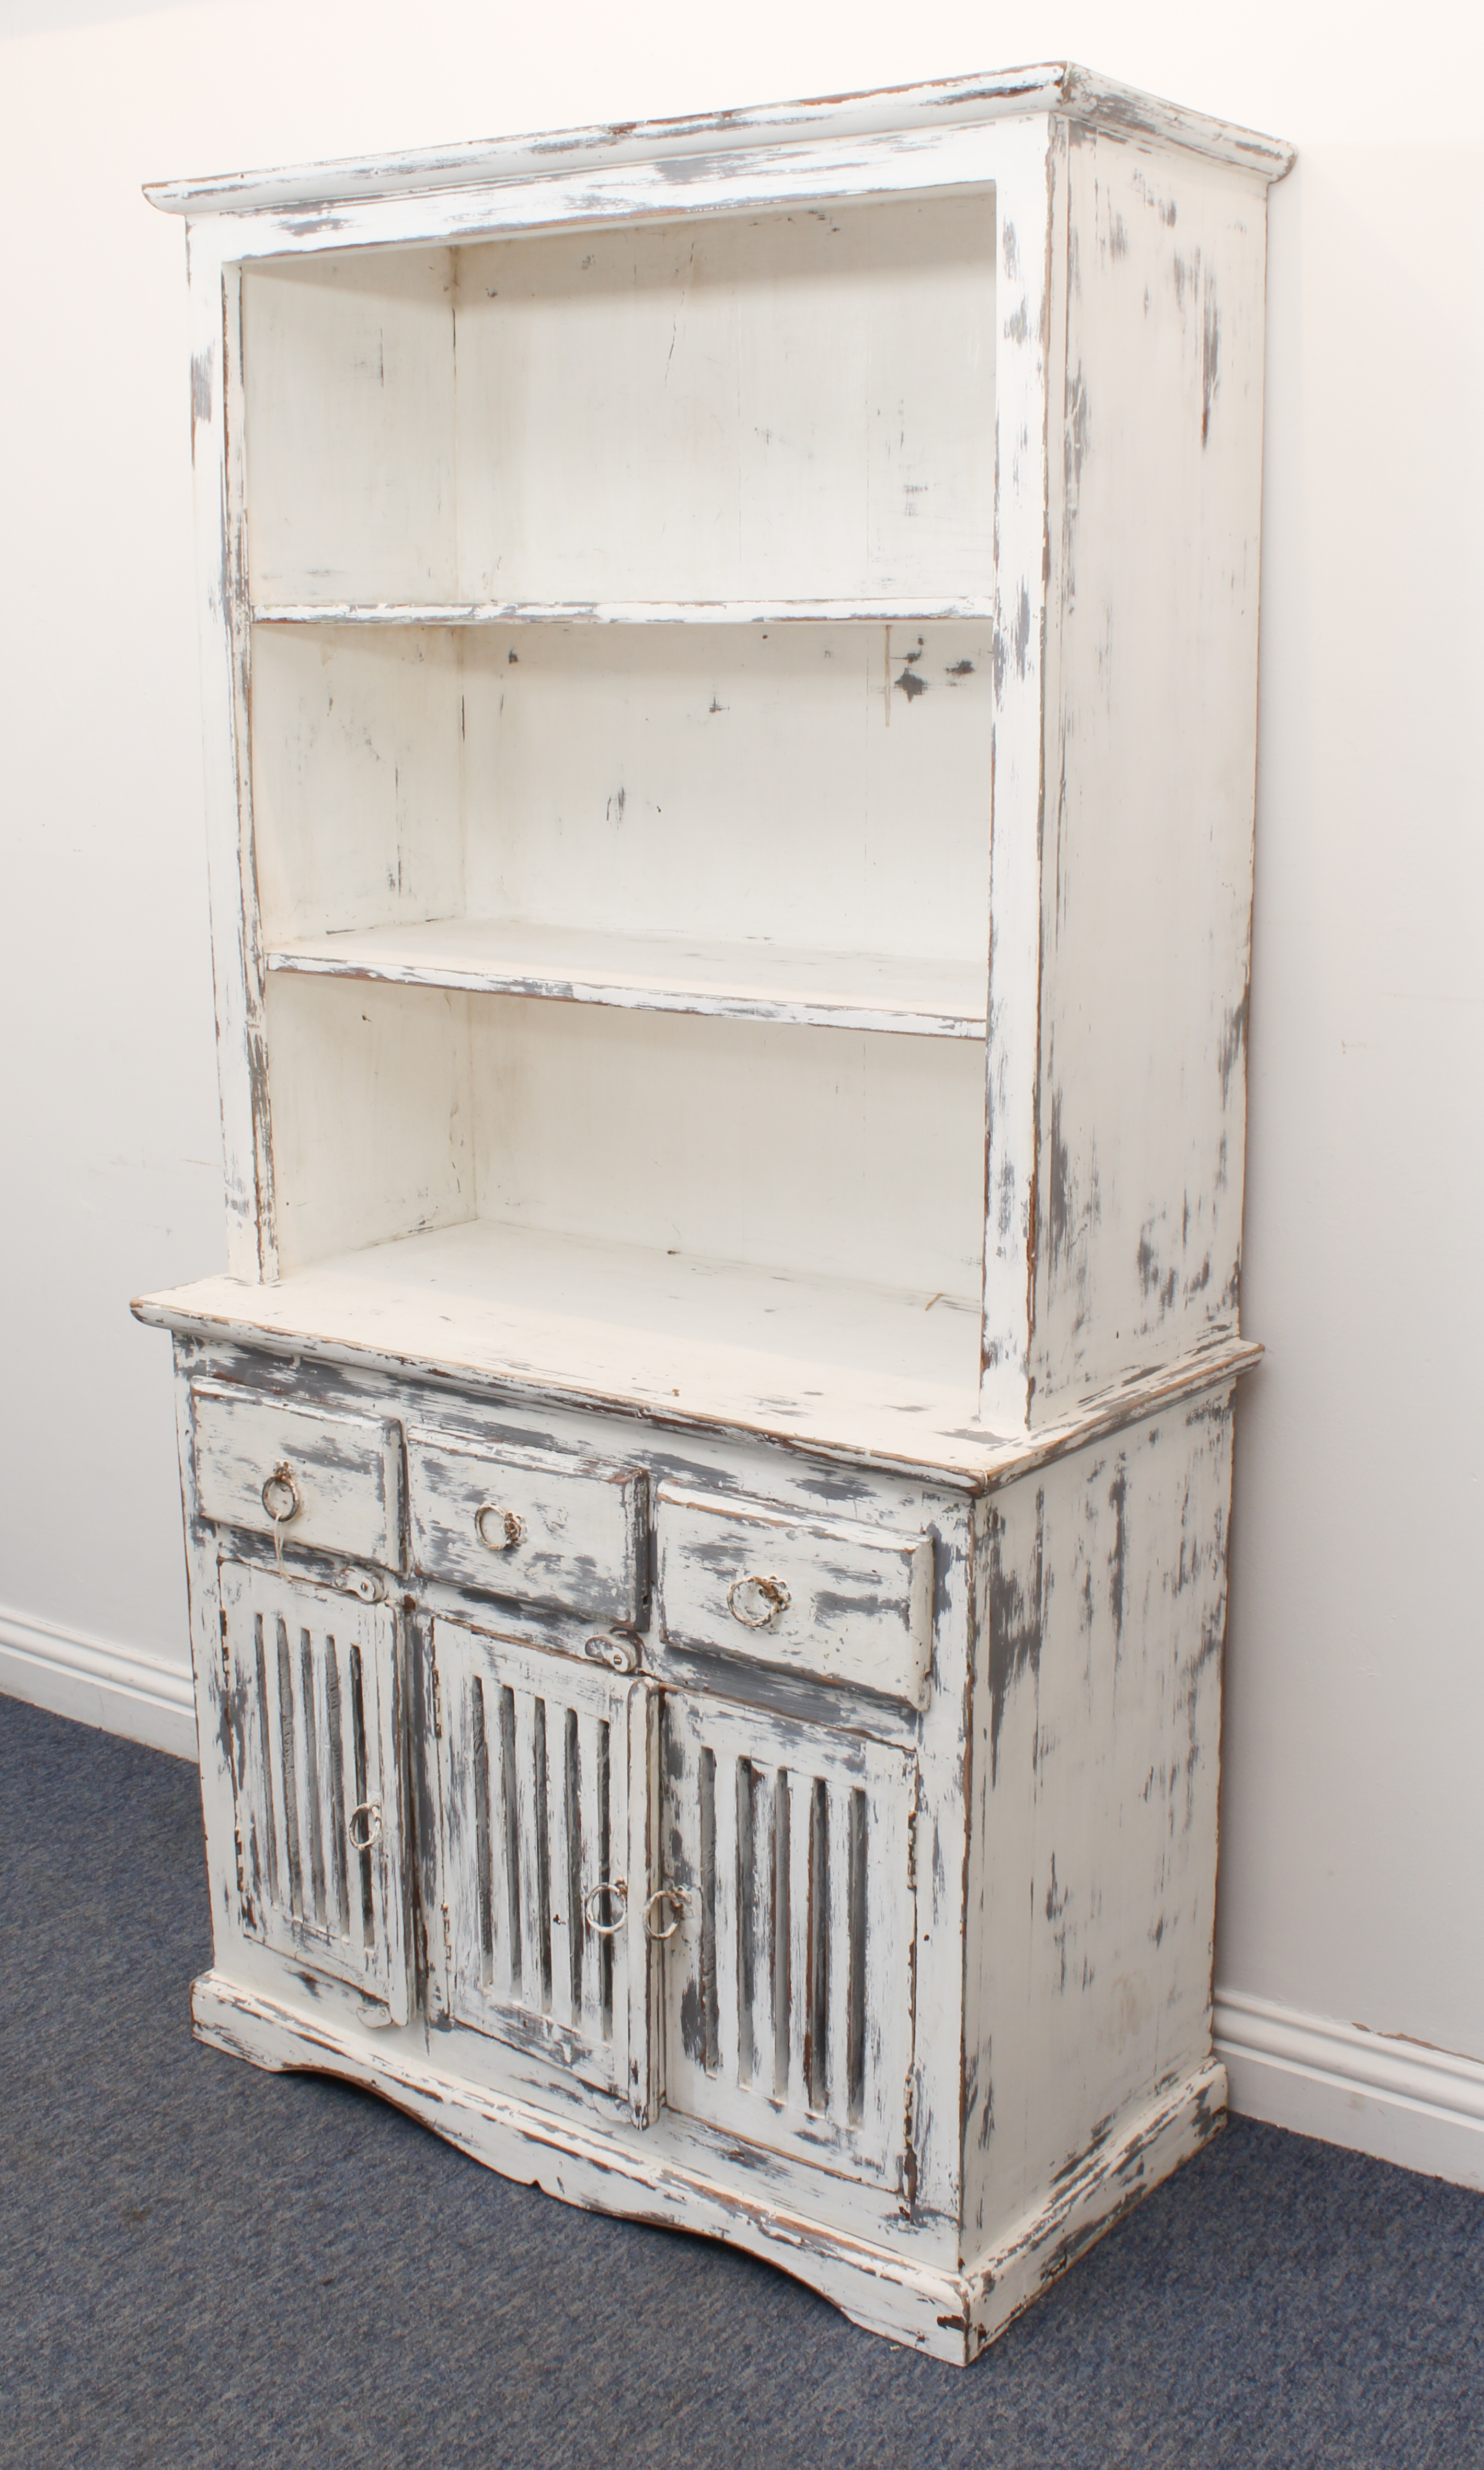 An Indian hardwood kitchen dresser painted in the shabby chic style - mid-20th century, the